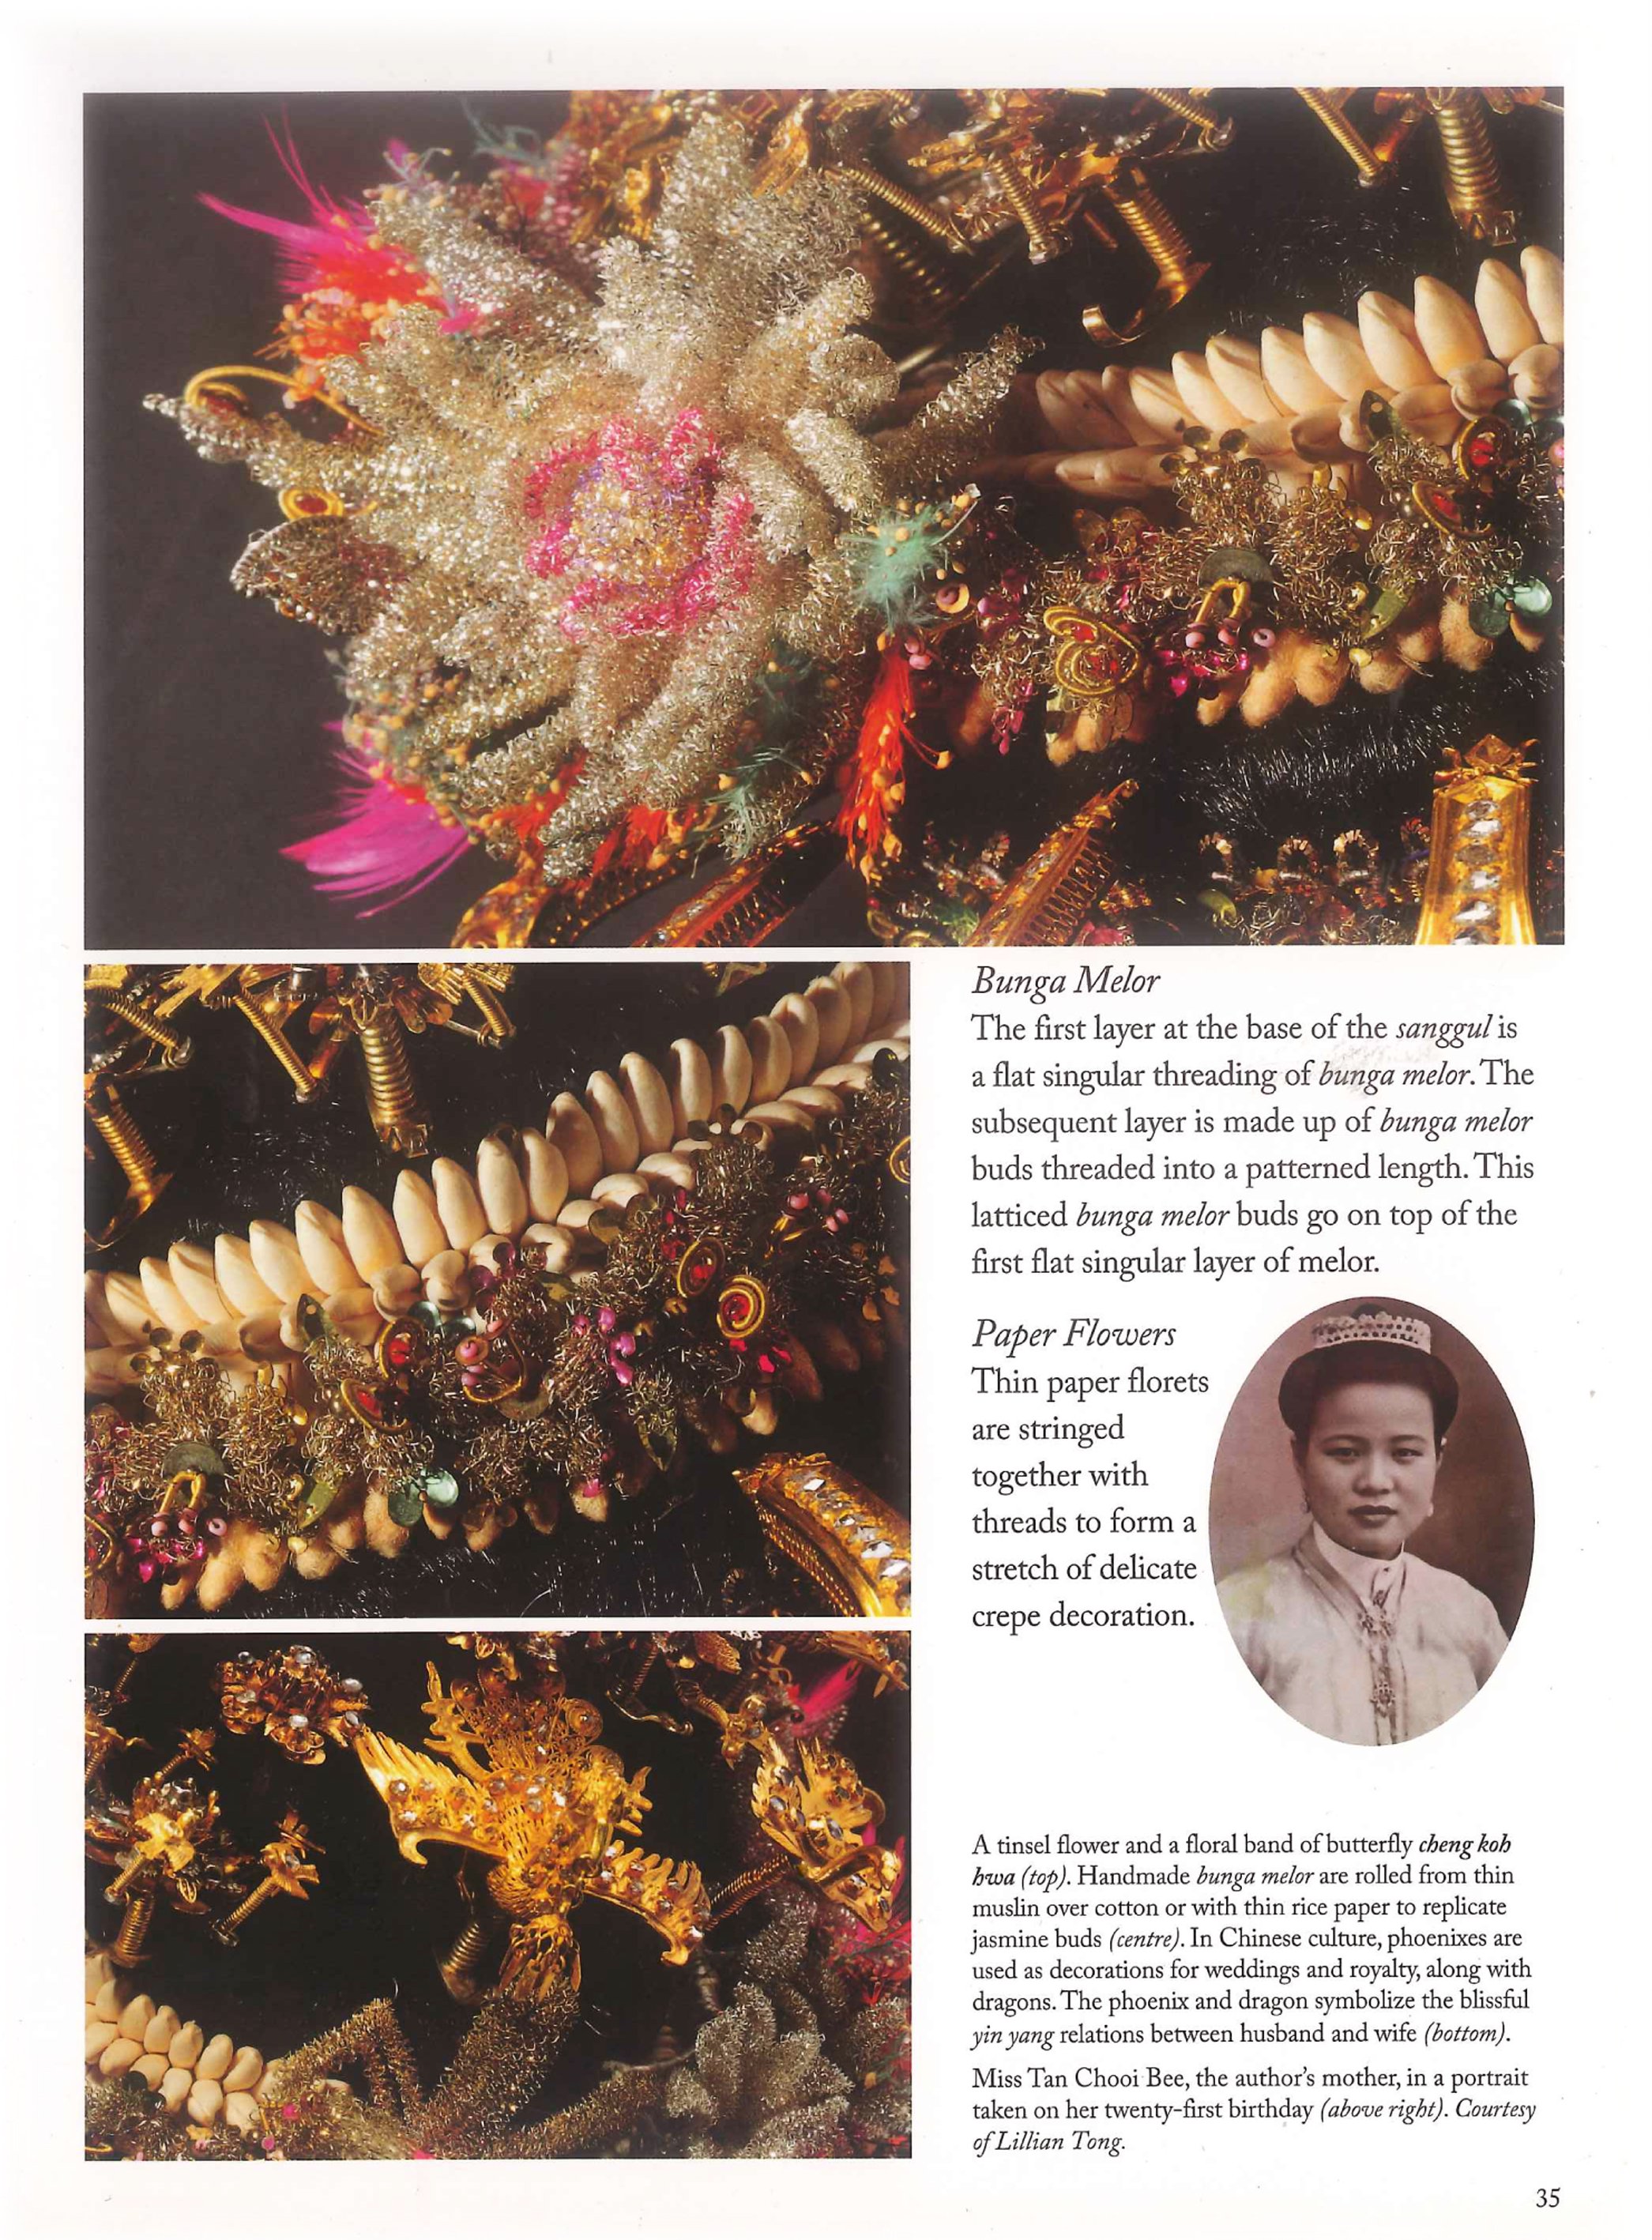  A Peranakan bride's wedding head gear, up close.&nbsp;  Image credit: Straits Chinese Gold Jewellery: The Private Collection of Peter Soon by Lillian Tong 